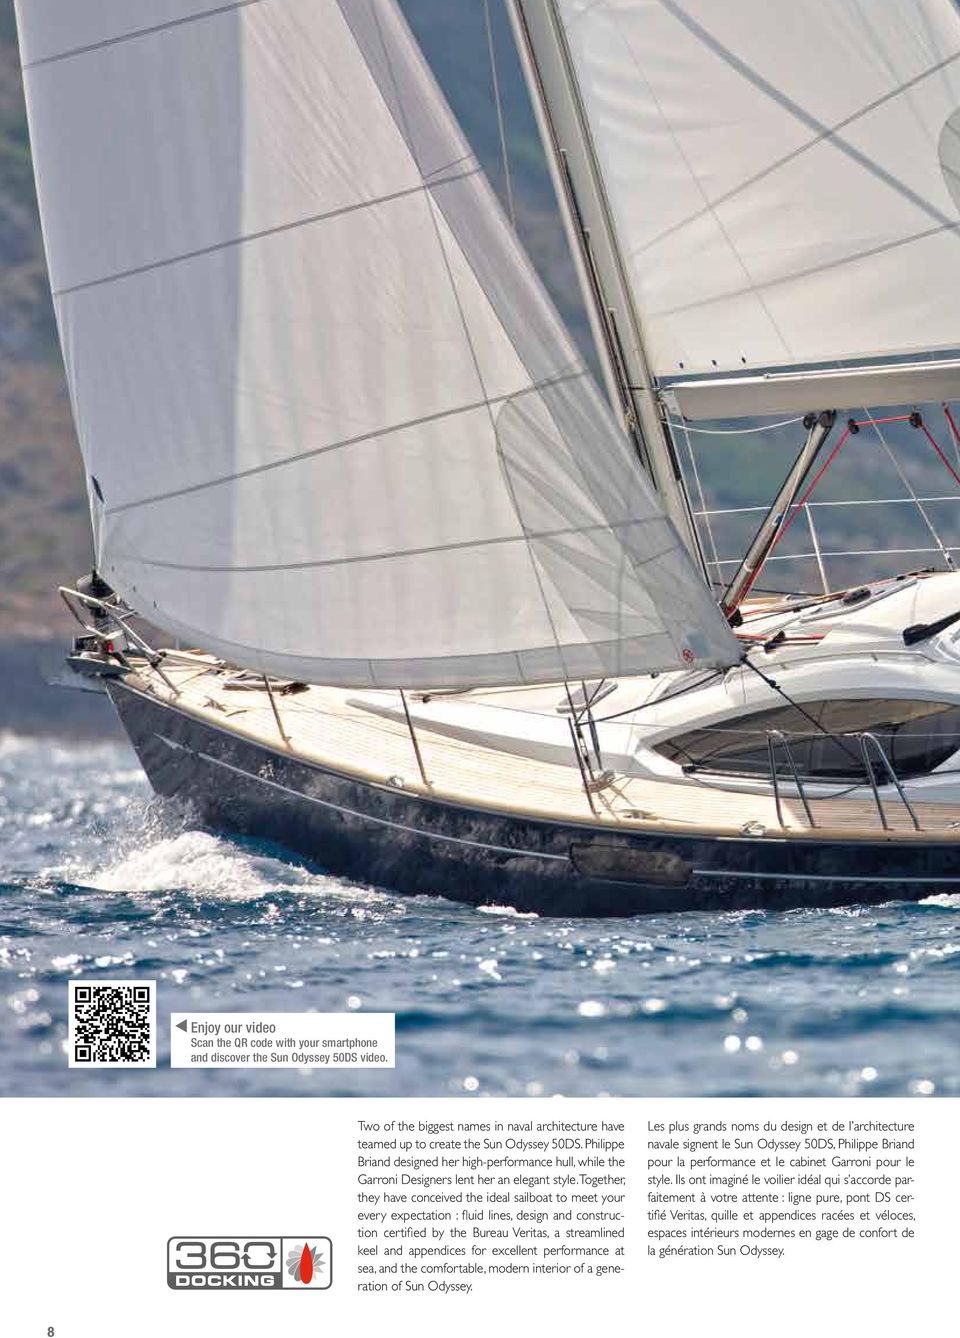 Together, they have conceived the ideal sailboat to meet your every expectation : fluid lines, design and construction certified by the Bureau Veritas, a streamlined keel and appendices for excellent